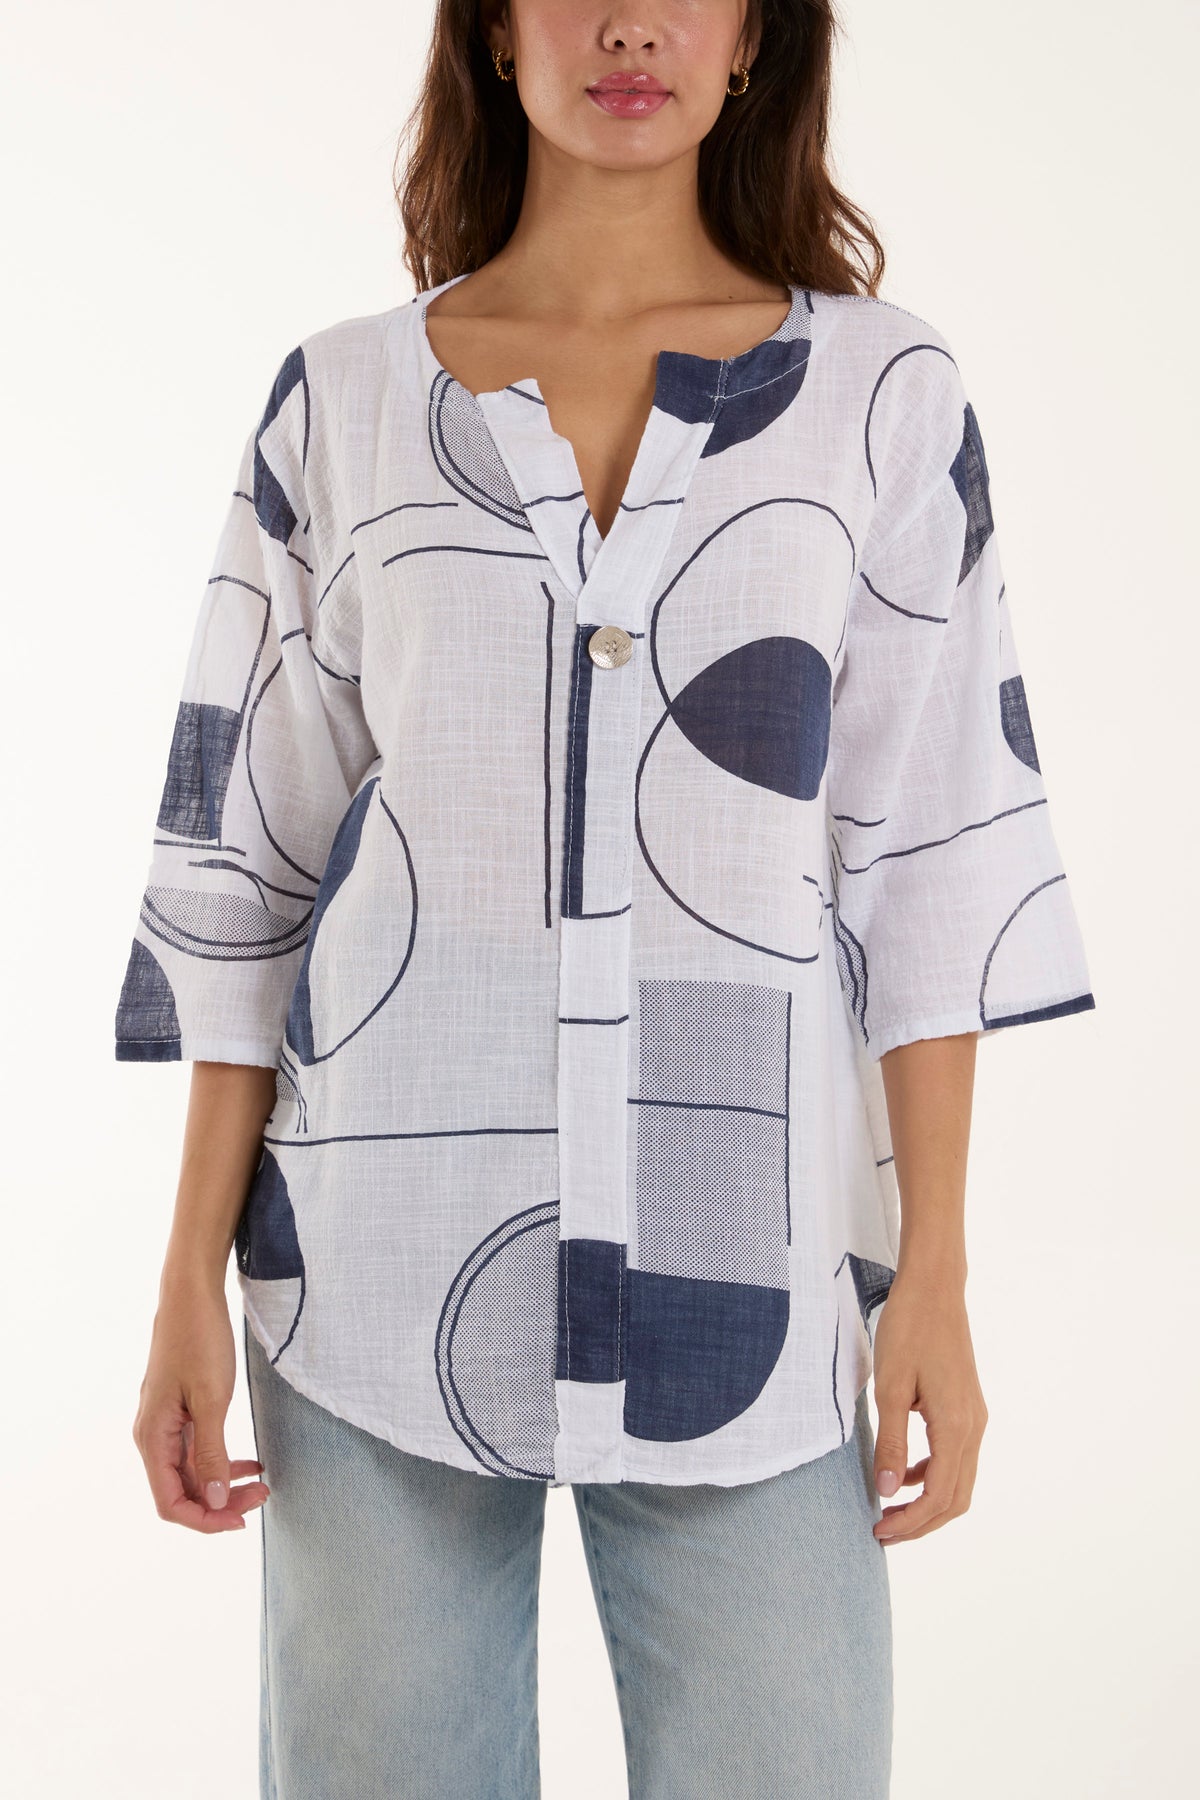 Geometric Shapes Silver Button Top